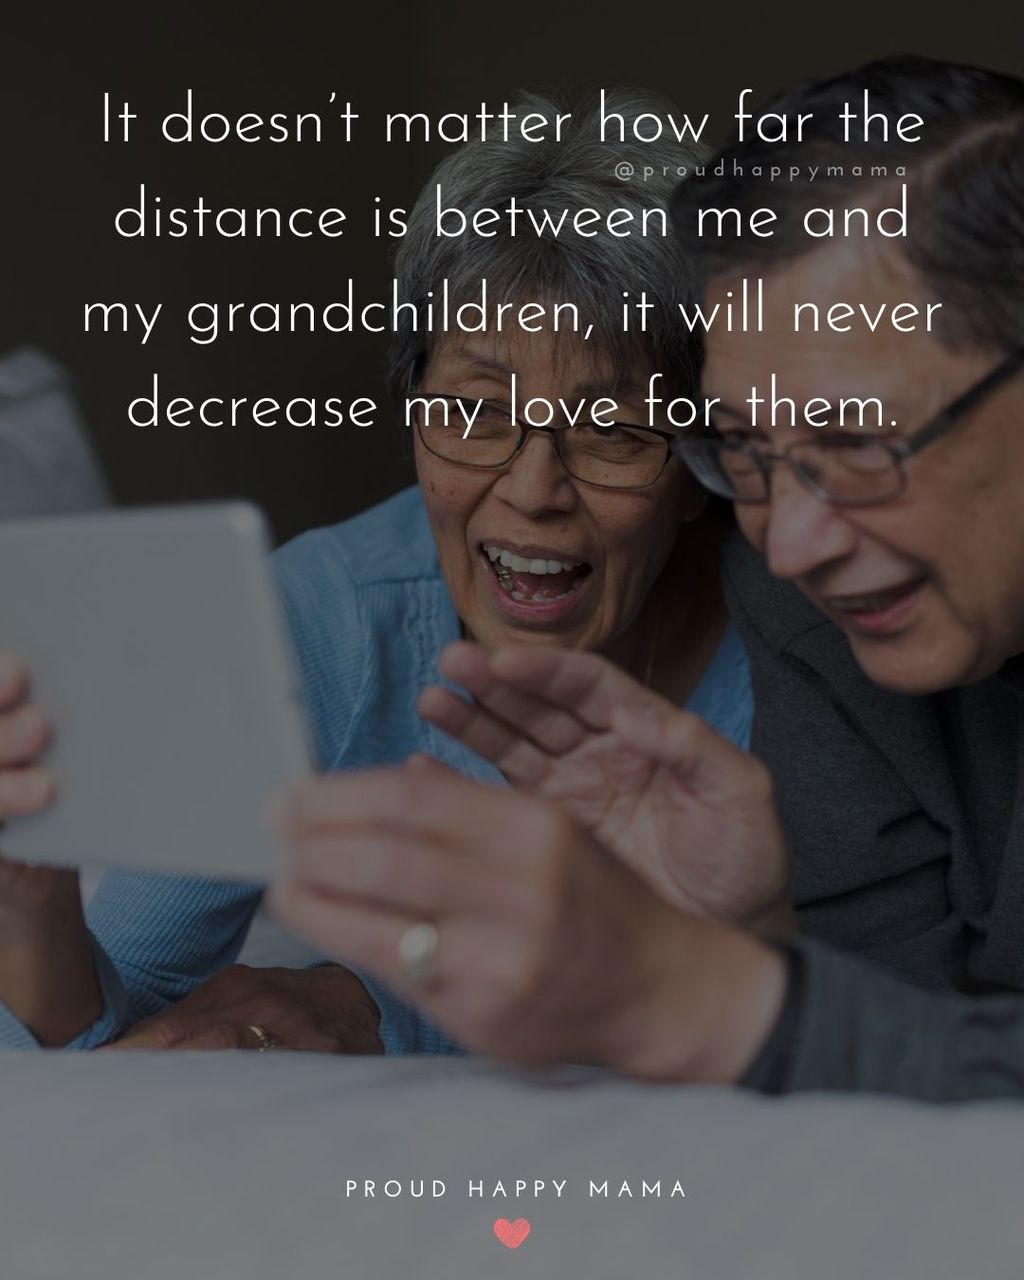 Quotes for Grandchildren - It doesnt matter how far the distance is between me and my grandchildren, it will never decrease my love for them.